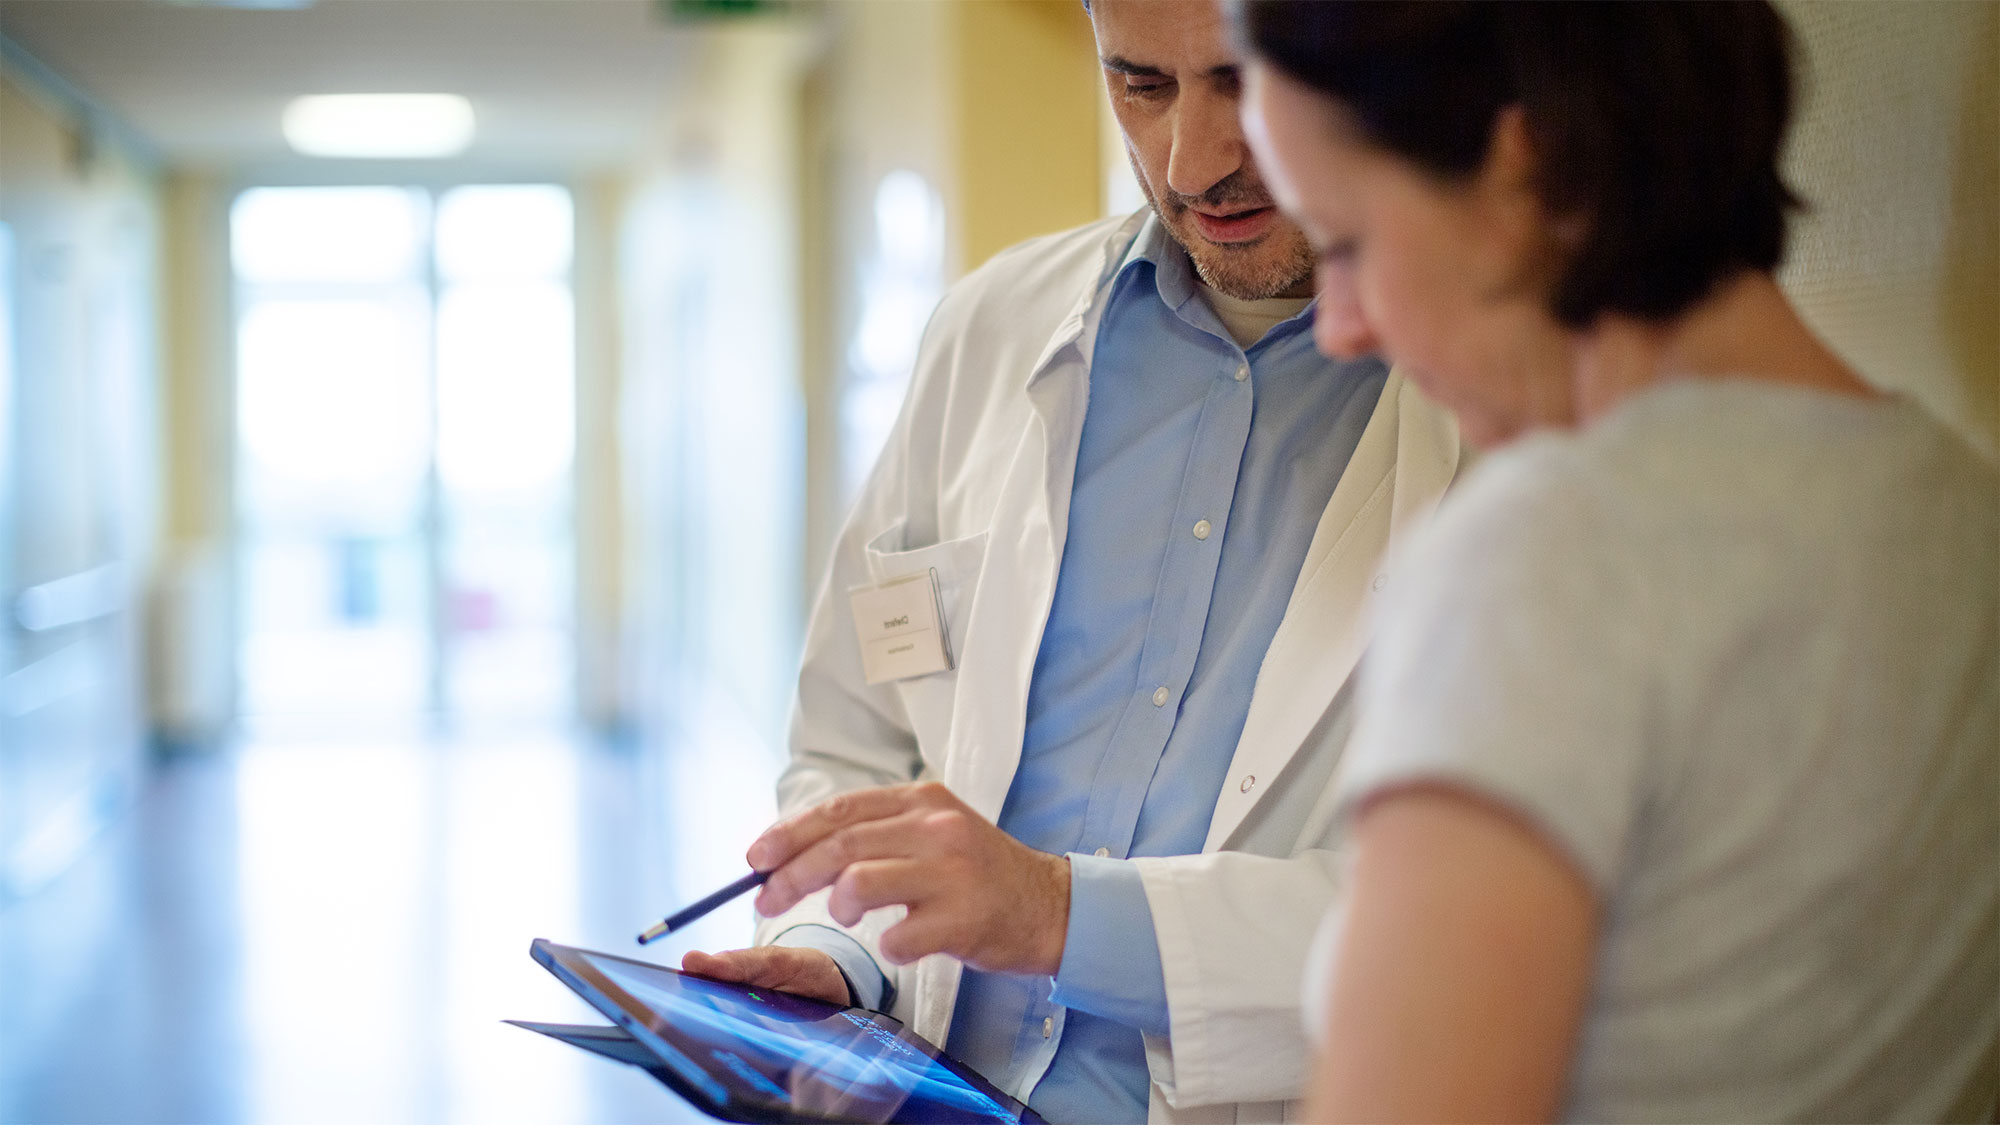 A doctor discusses a diagnosis with a patient using an iPad. The 5G network enables real-time networking and thus helps patients.